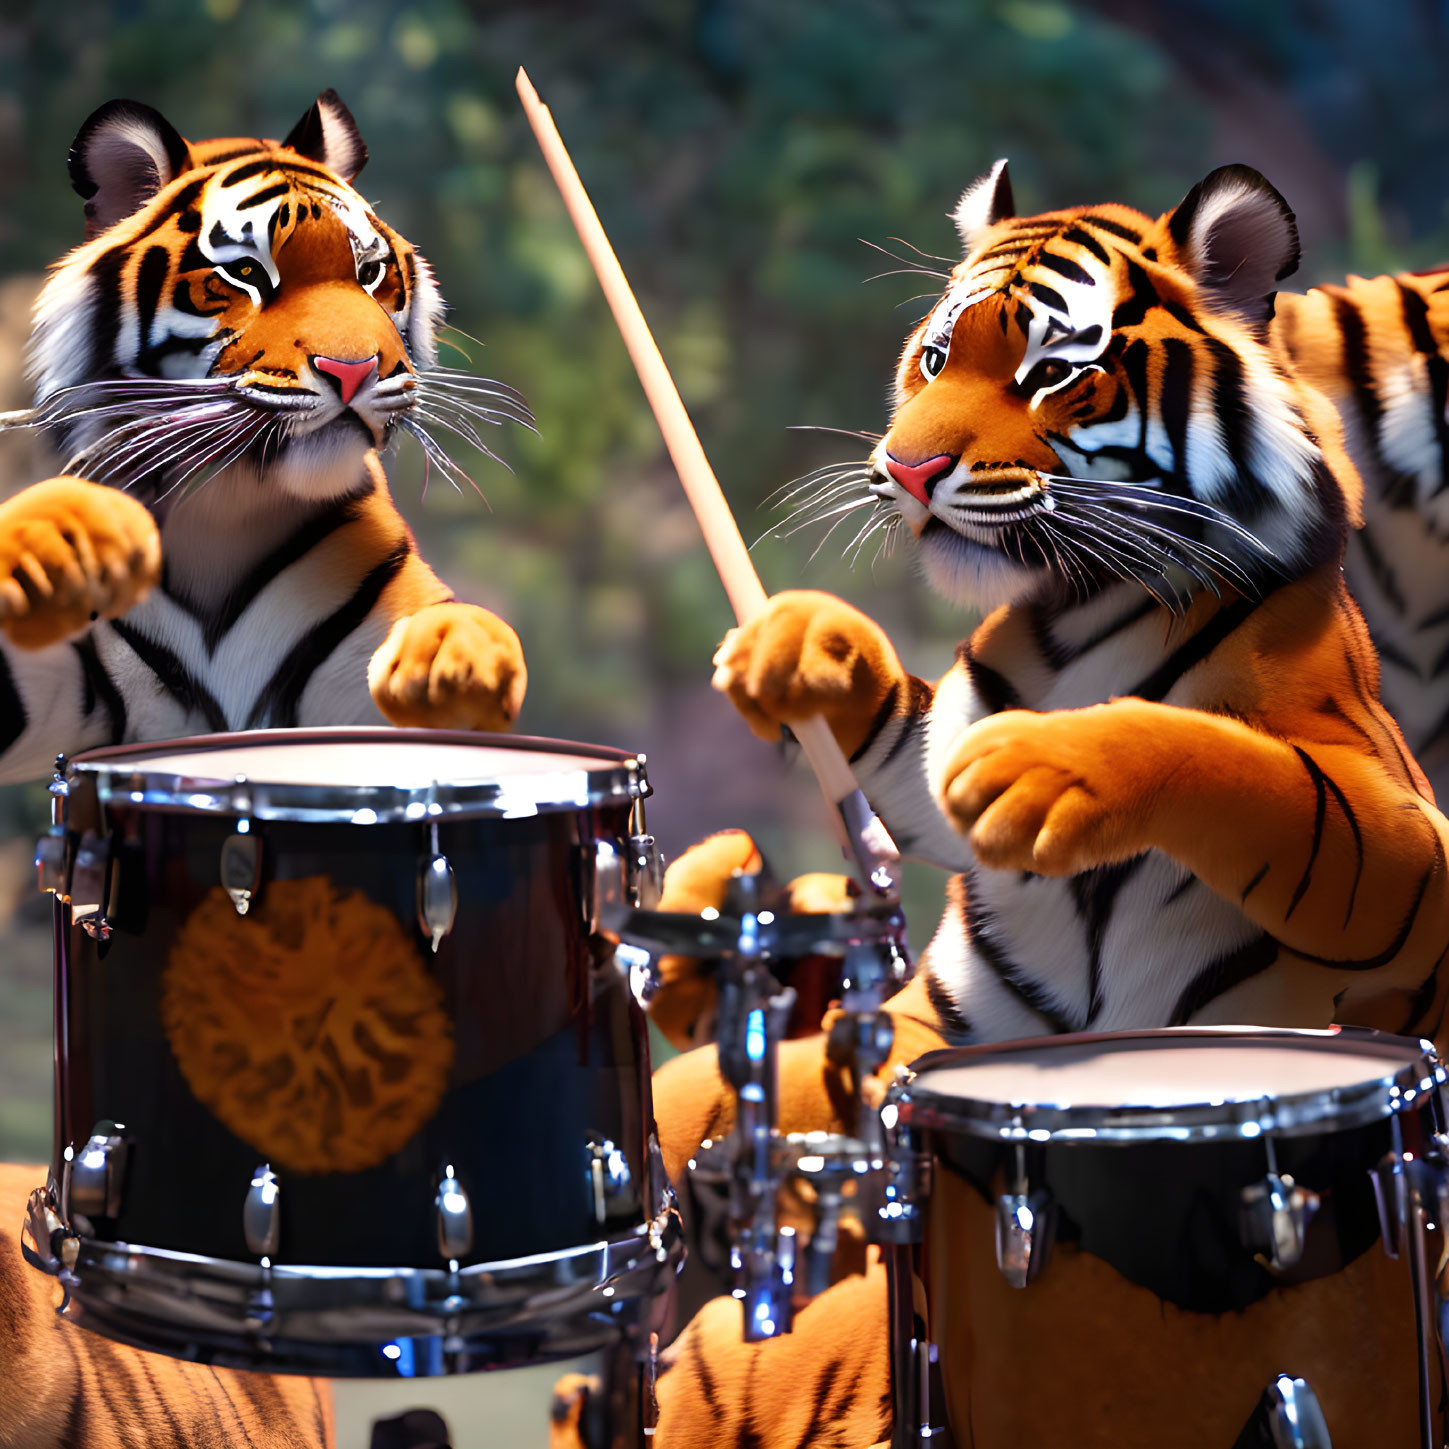 Two animated tigers playing drums in forest setting